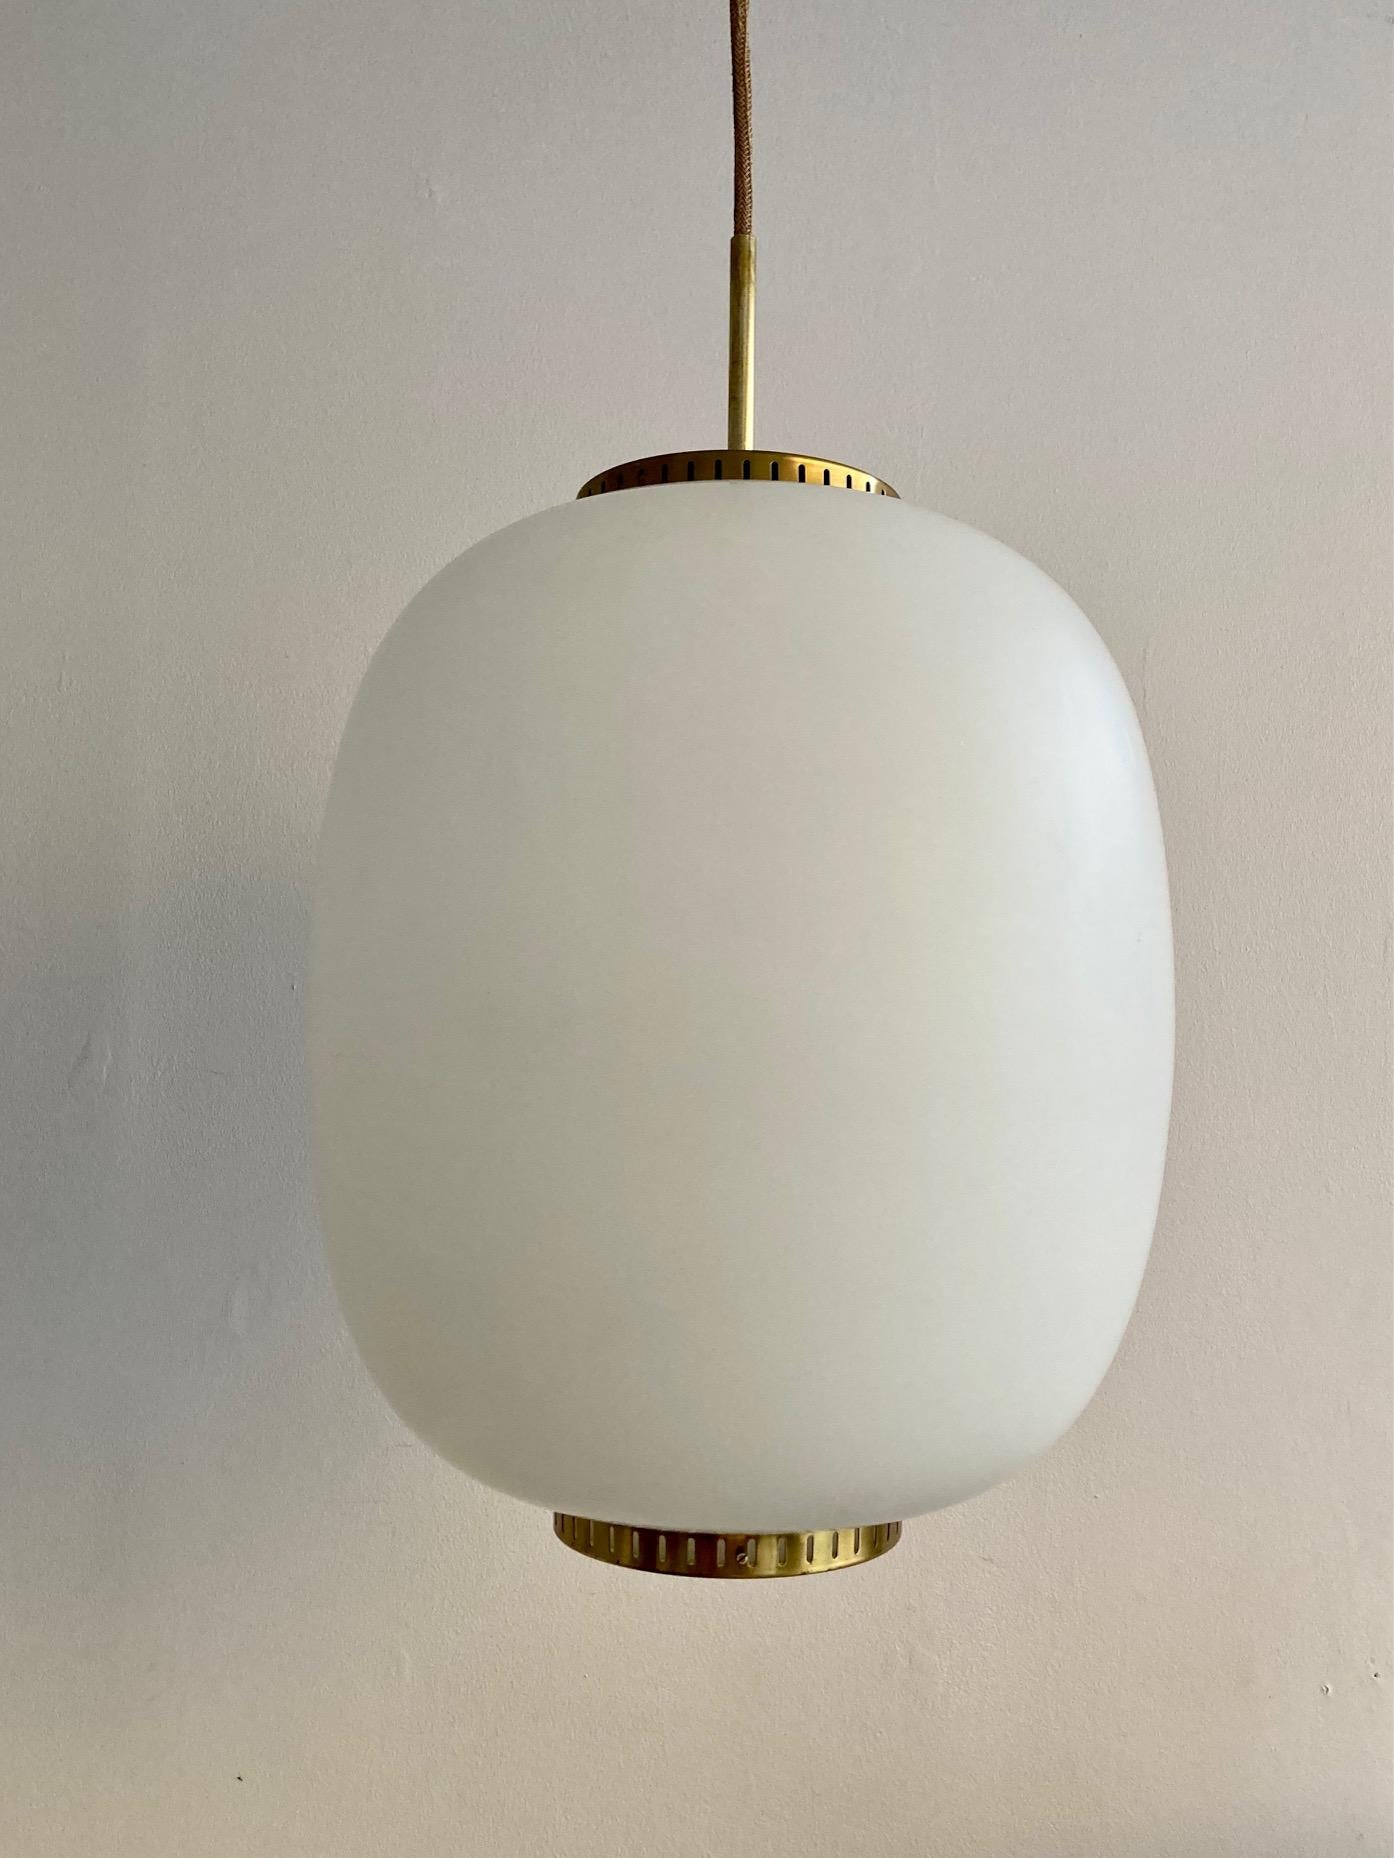 Danish Collection of 11 Opaline Glass and Brass Ceiling Fixtures, Bent Karlby for Lyfa